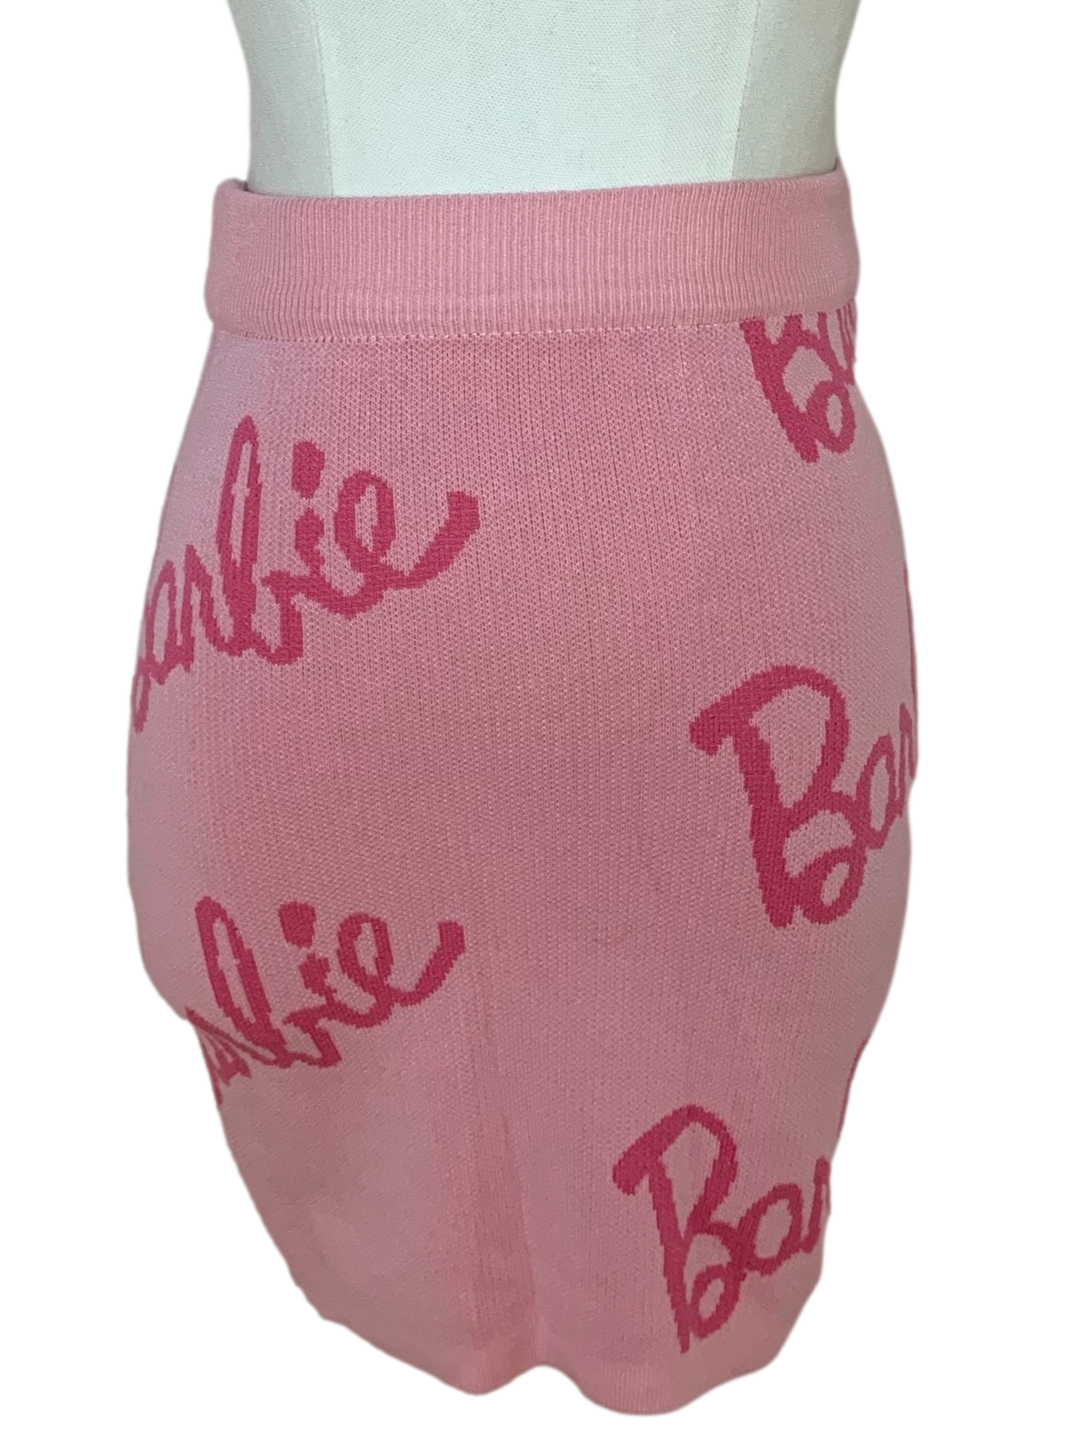 Rose Barbie Pink Knitted Skirt